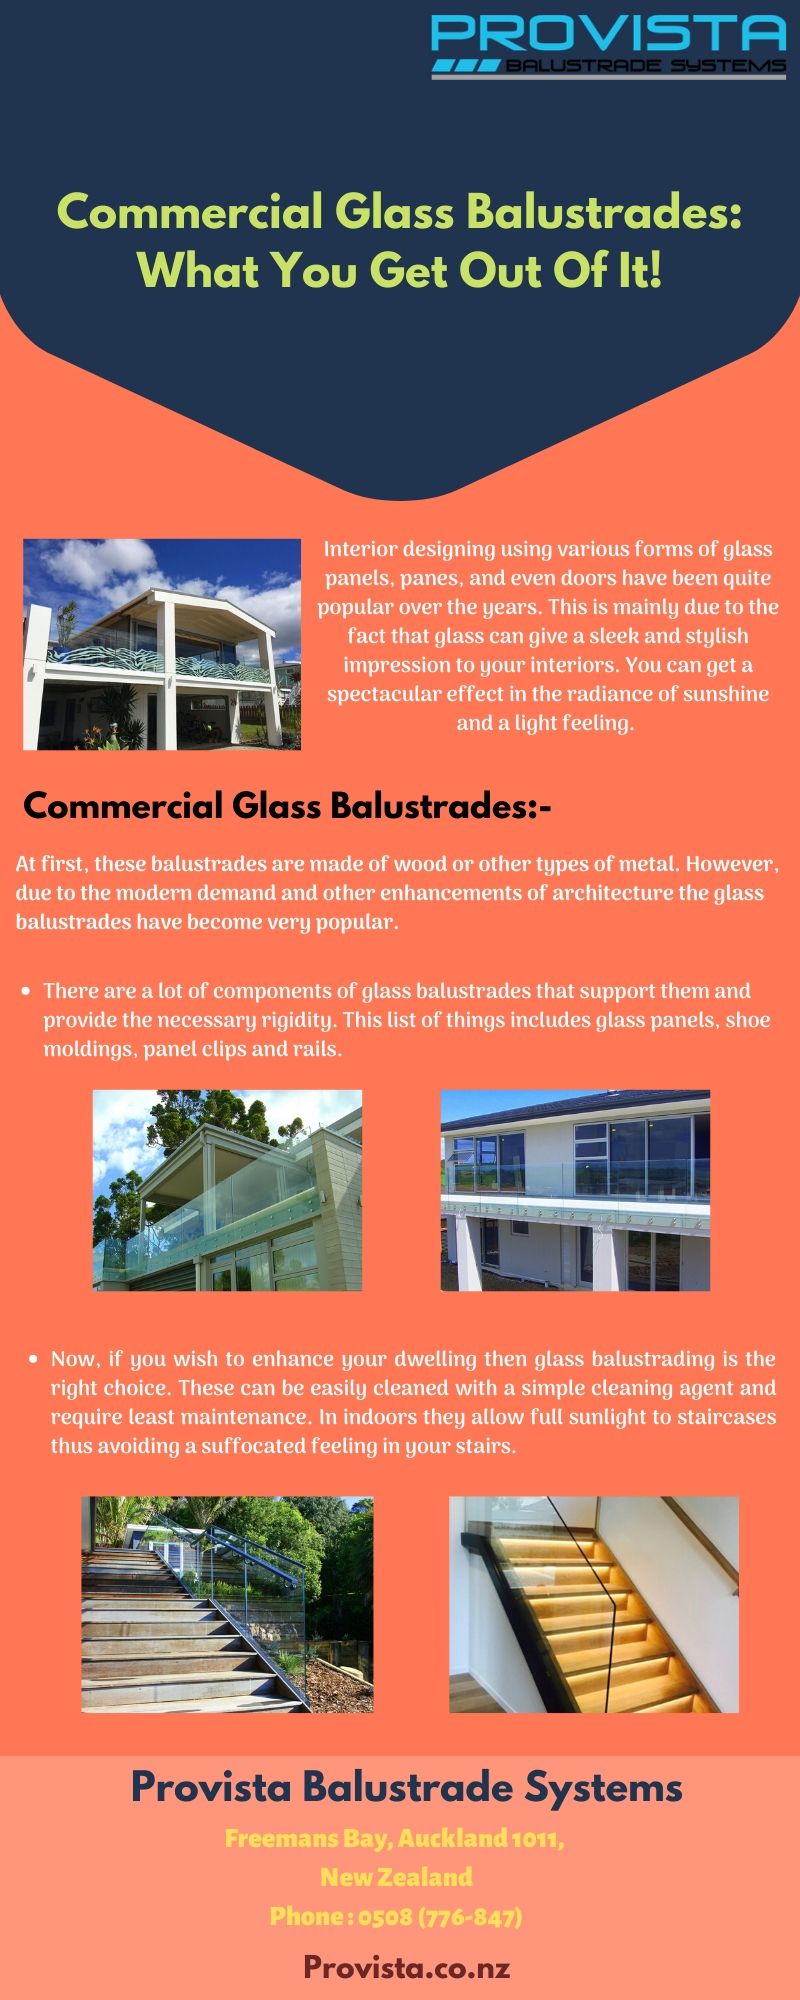 Commercial Glass Balustrades: What You Get Out Of It! Interior designing using various forms of glass panels and panes has been quite popular over the years. Glass balustrades are one such thing. For more details, visit this link: https://bit.ly/2RJ5jX6
 by Provista